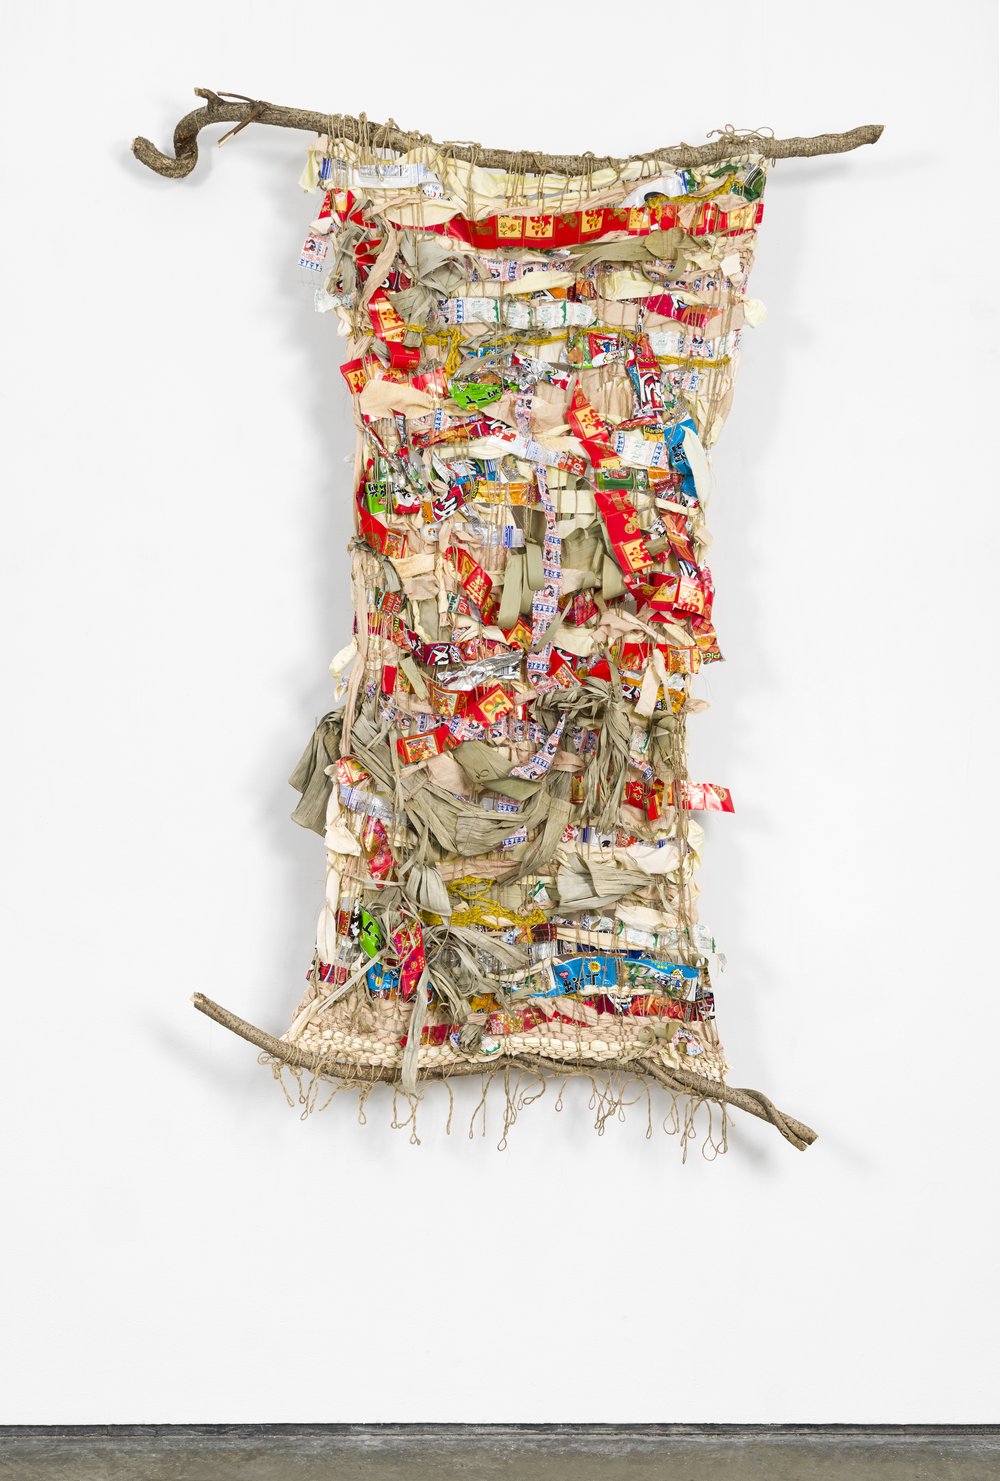  Zoila Andrea Coc-Chang,  tejiendo el universe leng3 , 2021, Bittersweet tree branch, jute, thread, naturally dyed cotton, wool, paper, bamboo leaves, banana leaves and food wrappers from family friends, and my own consumption, 6.5 feet x 4 feet x 6 